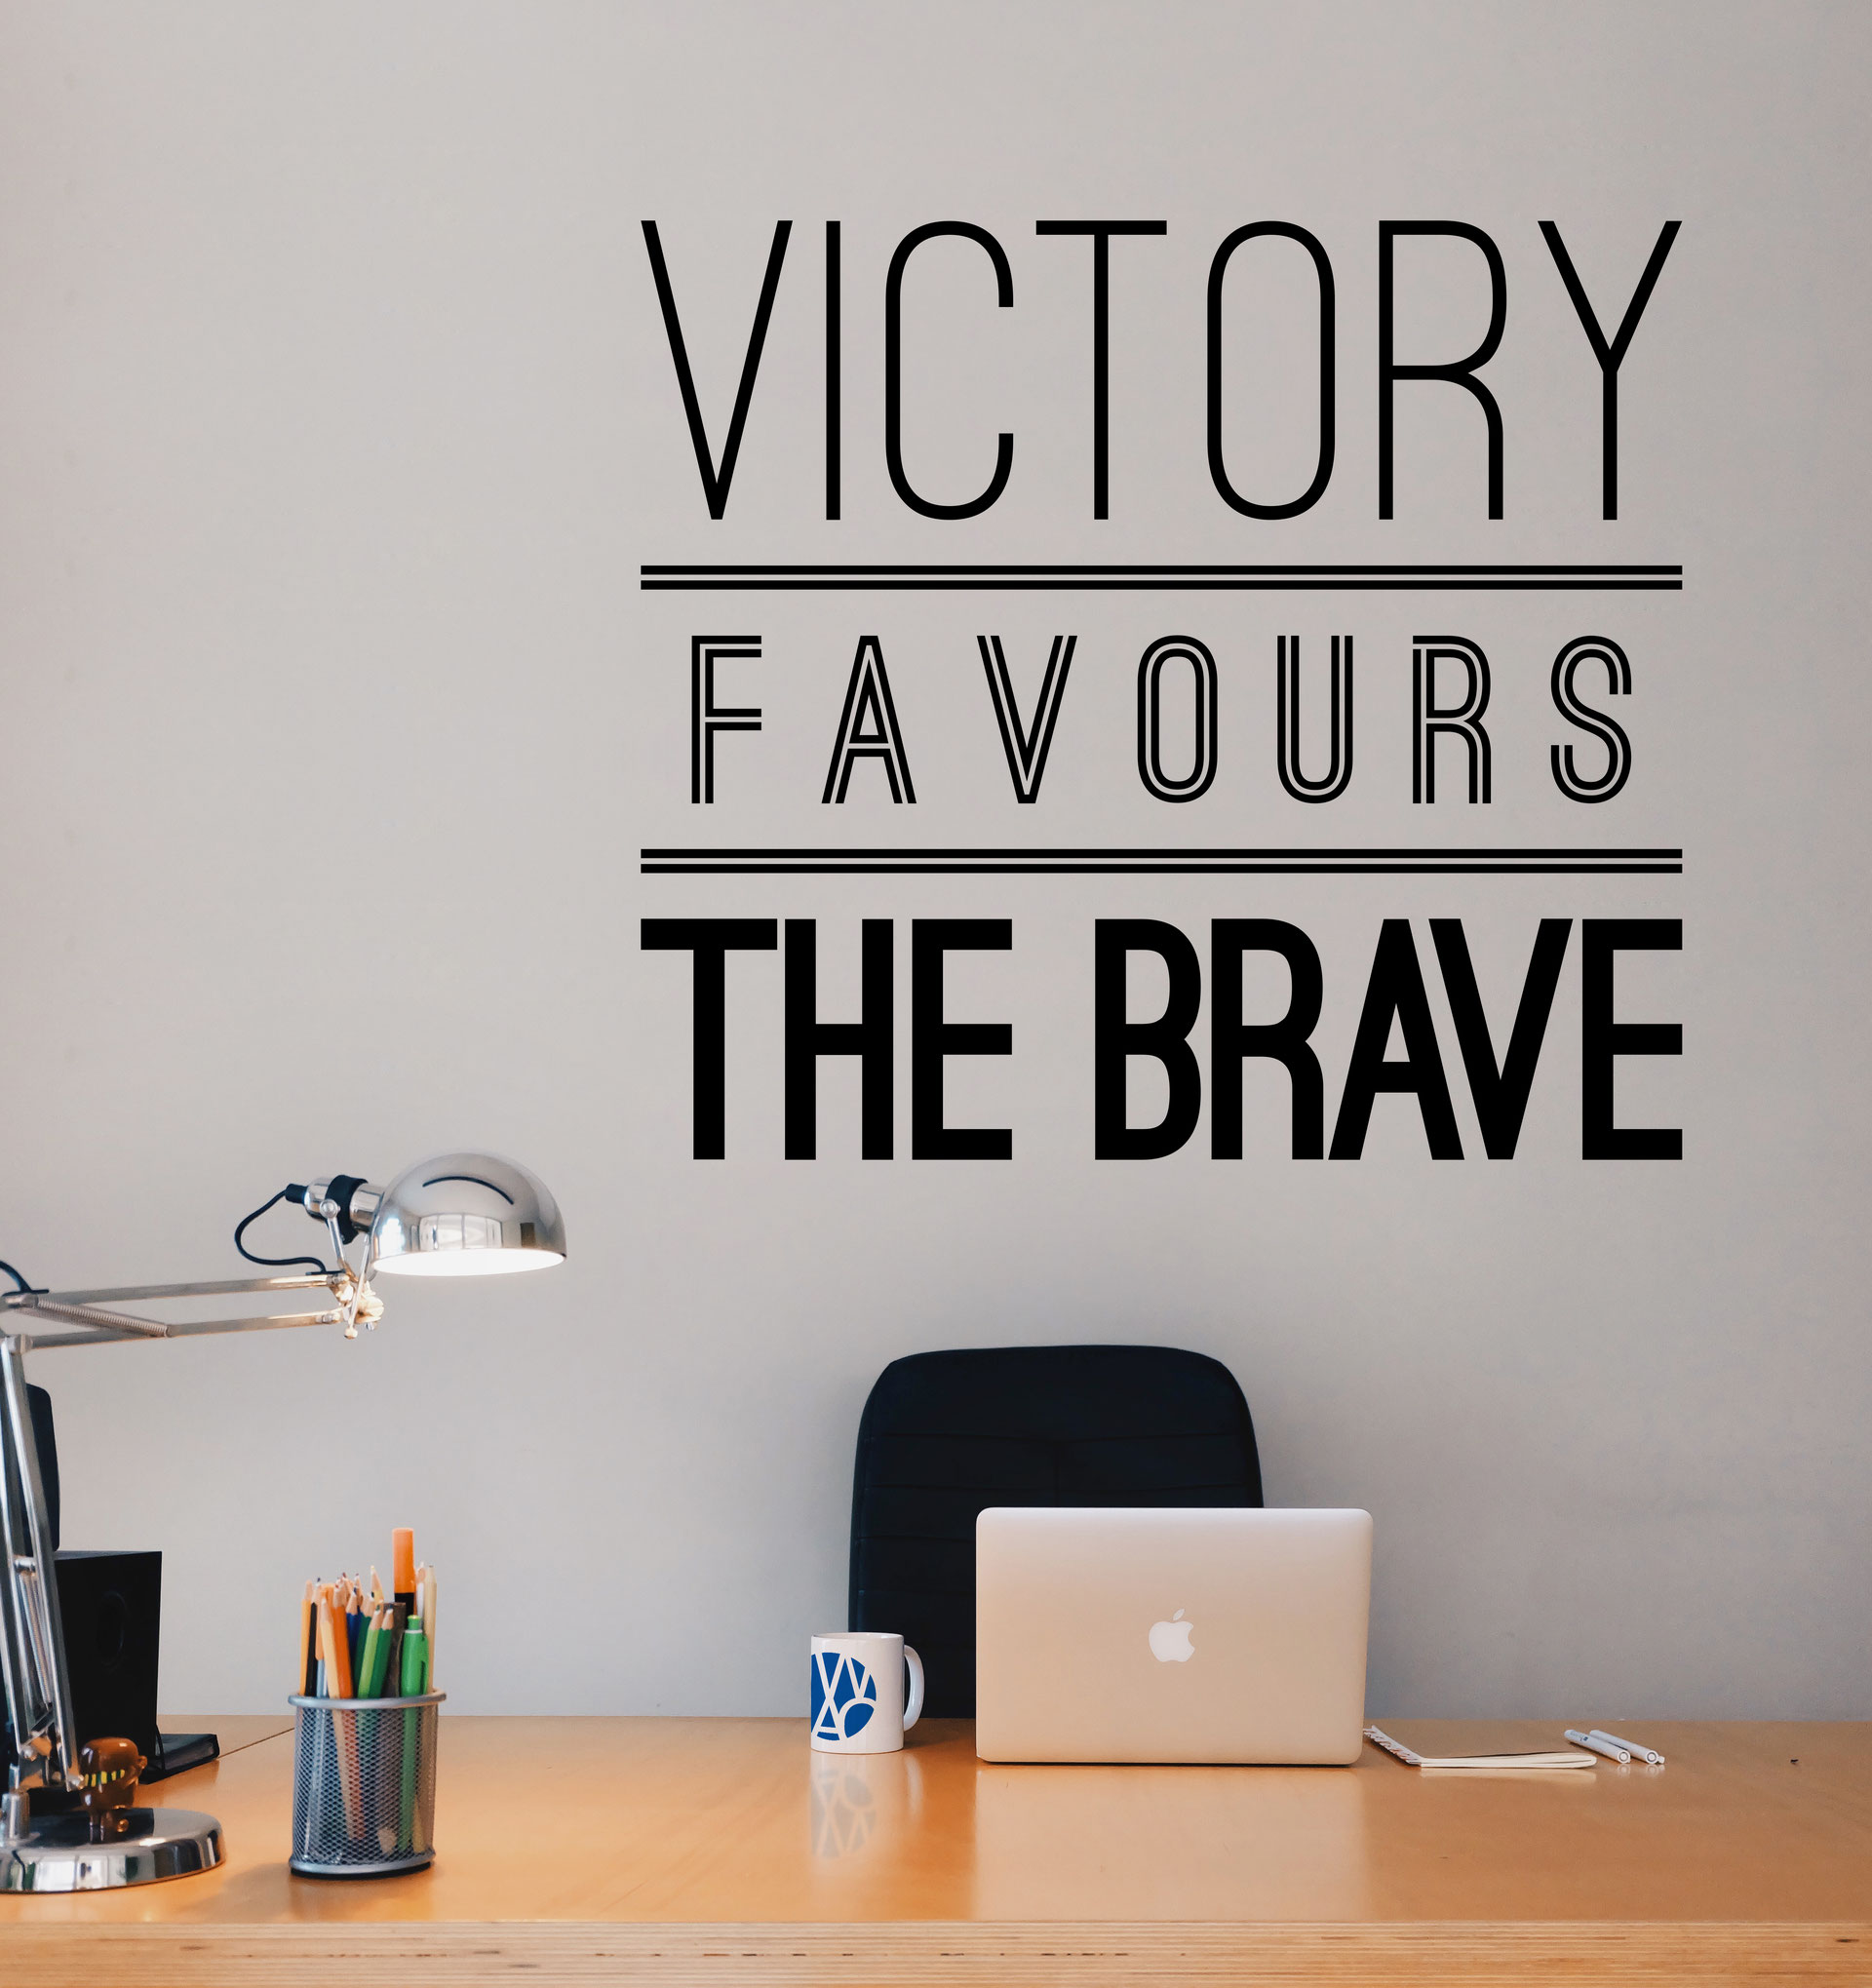 write a motivational speech on victory favours the brave